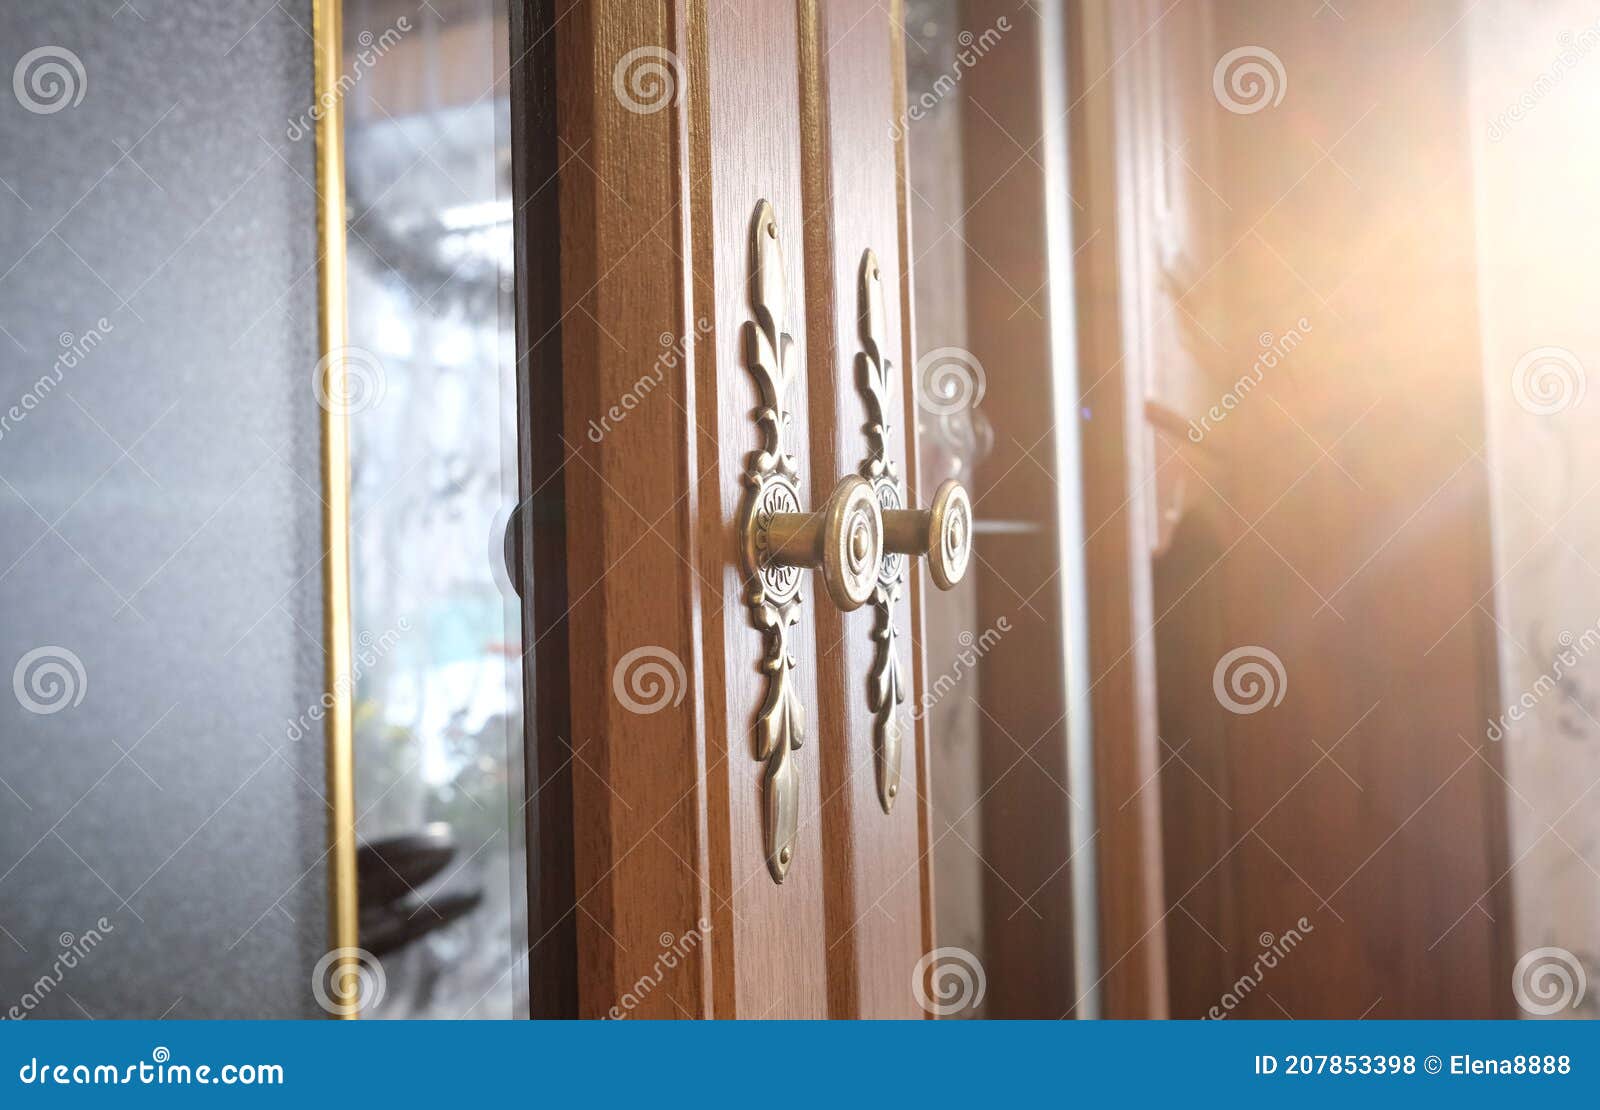 brass door with glass inserts and handles with ornate escutcheons on a wooden cabinet , close up, authentic interior home